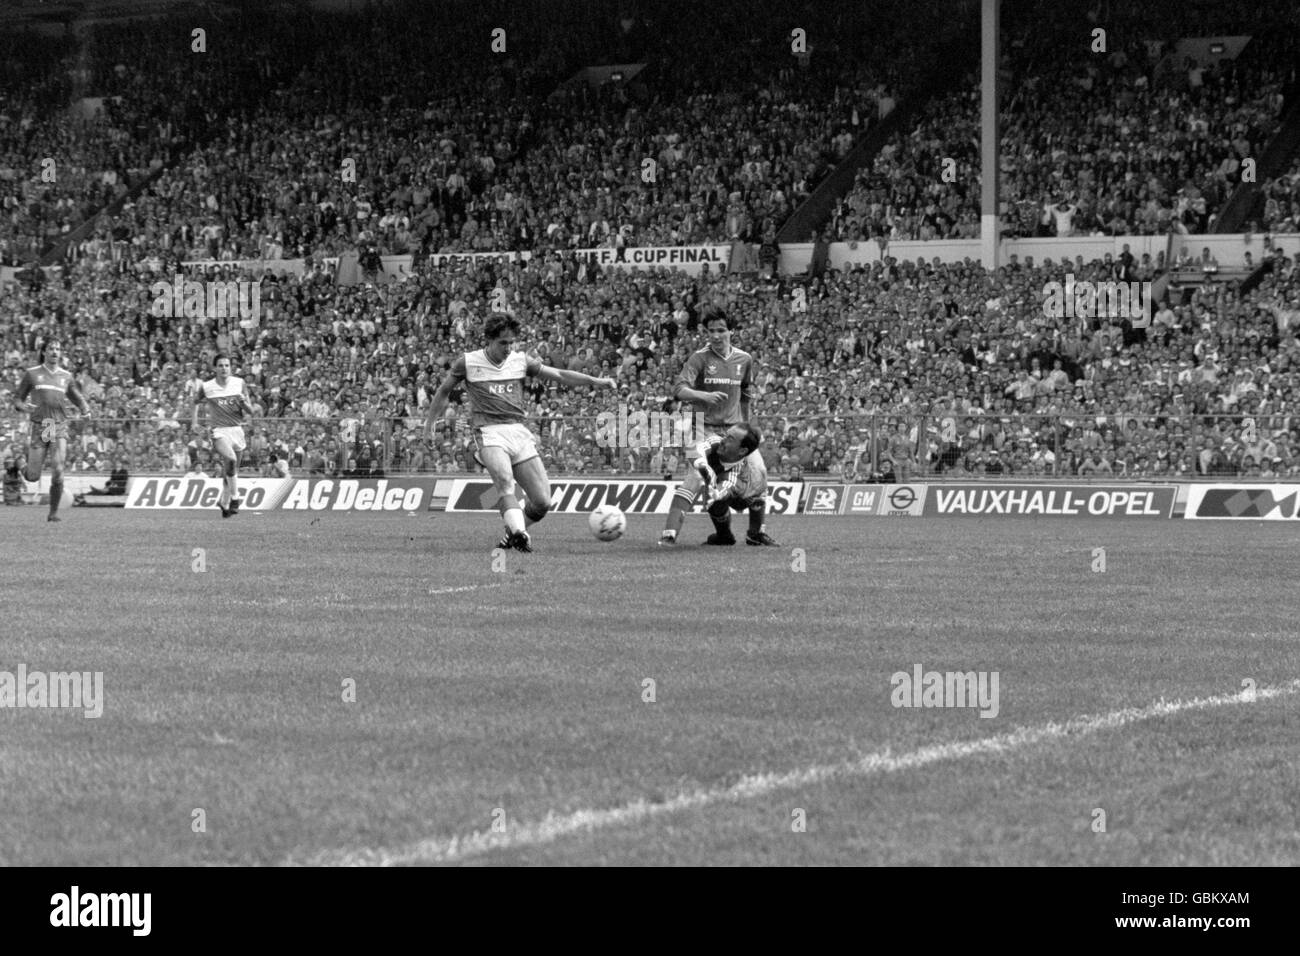 Soccer - FA Cup - Final - Everton v Liverpool. Everton's Gary Lineker (l) scores the opening goal past Liverpool's Alan Hansen (c) and Bruce Grobbelaar (r) Stock Photo